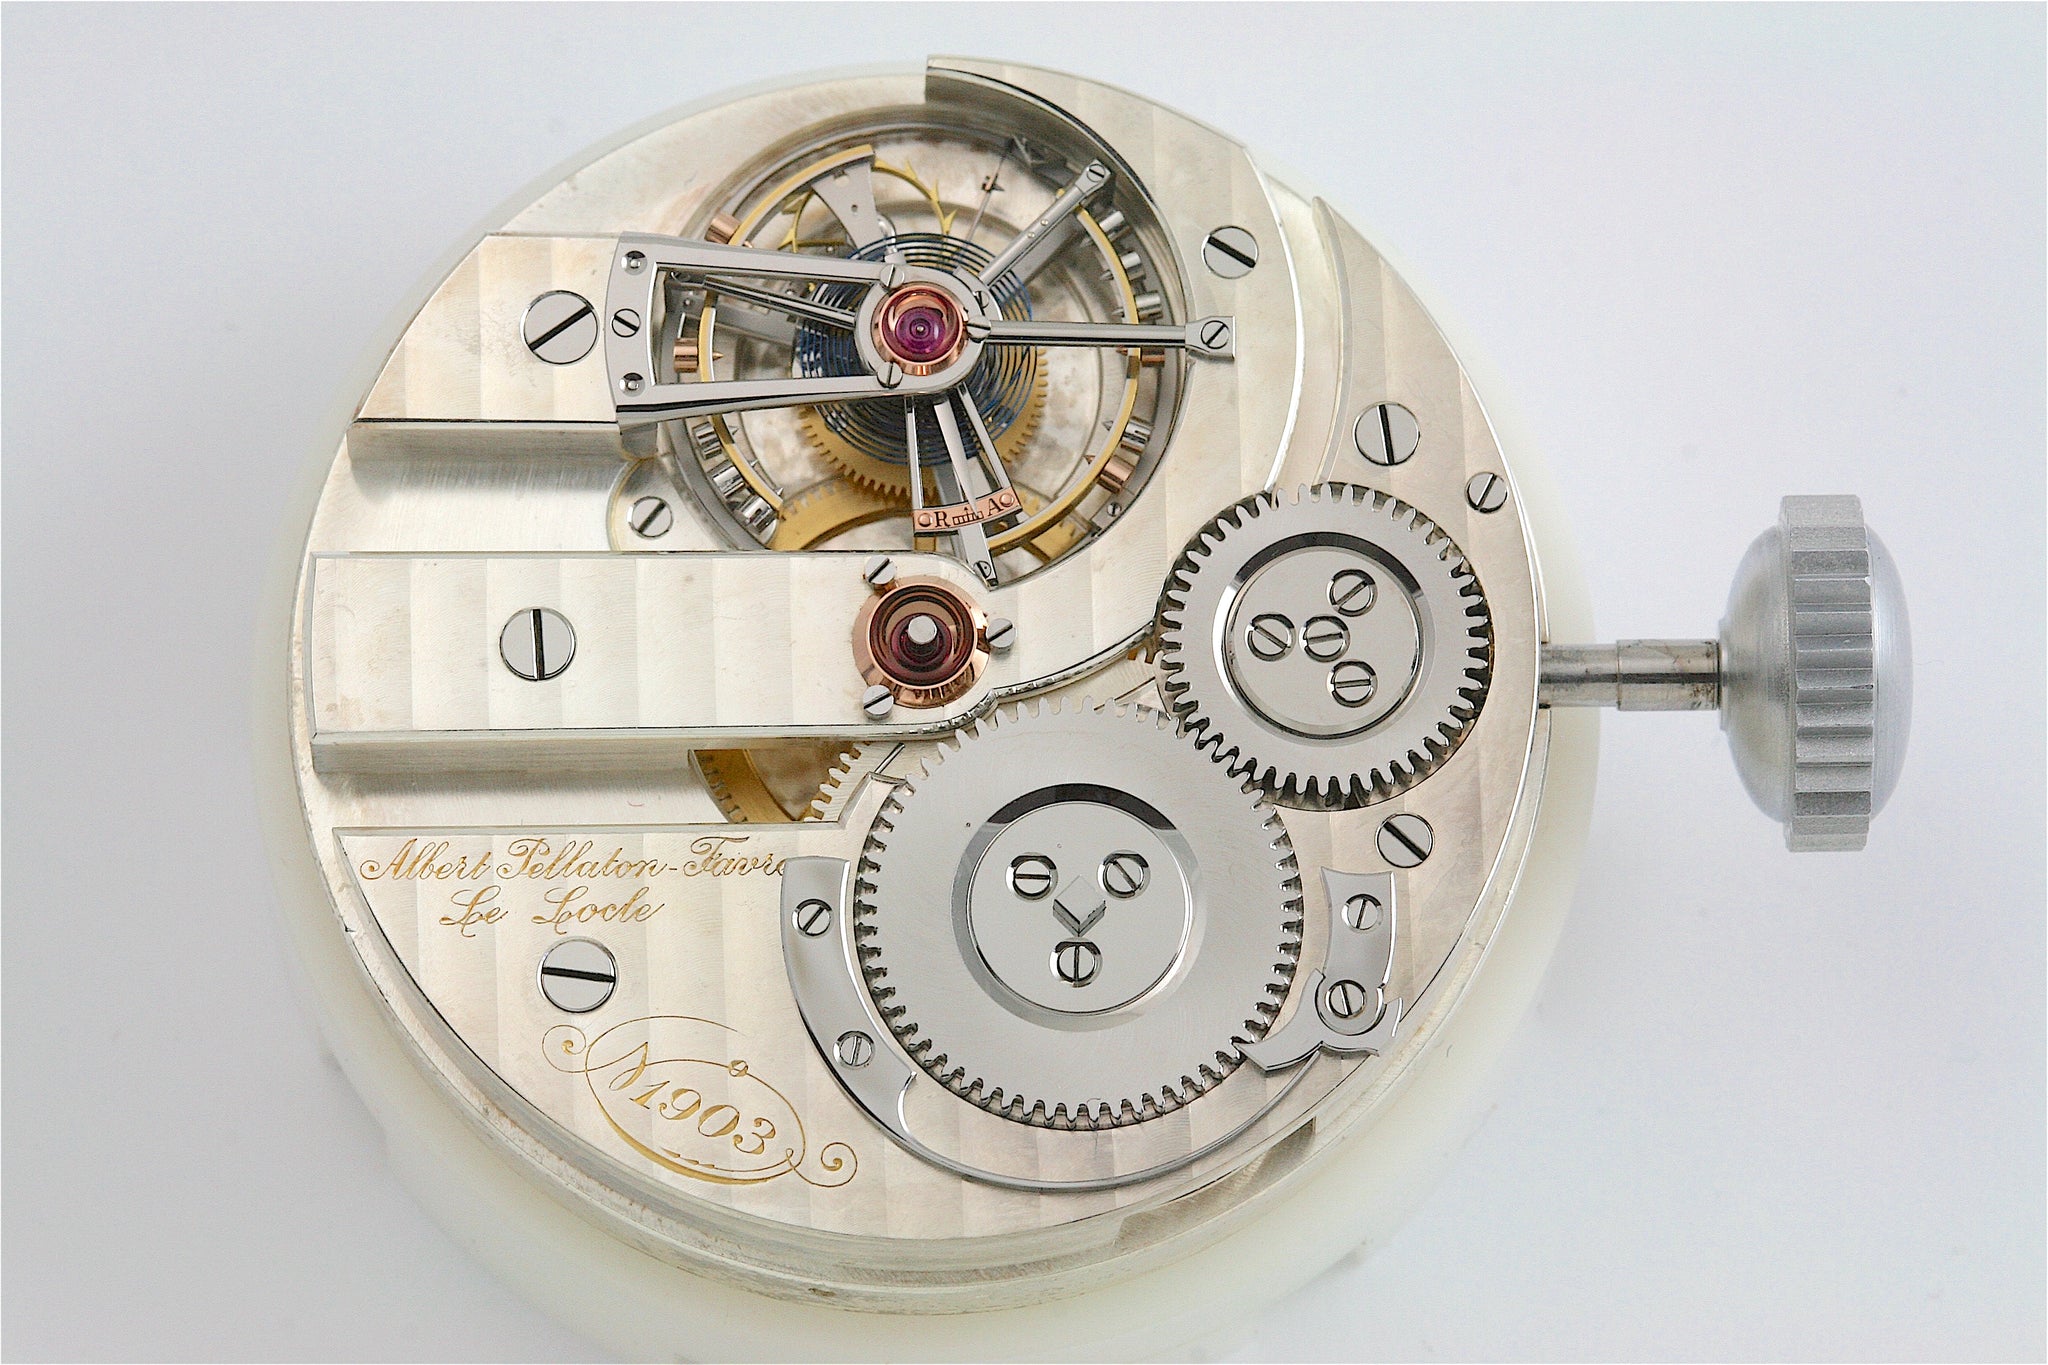 Read A Collected Man Journal Post | The movement of the Albert Pellaton pocket watch Pagès worked on | Inspirations Behind Today’s Independent Watchmakers